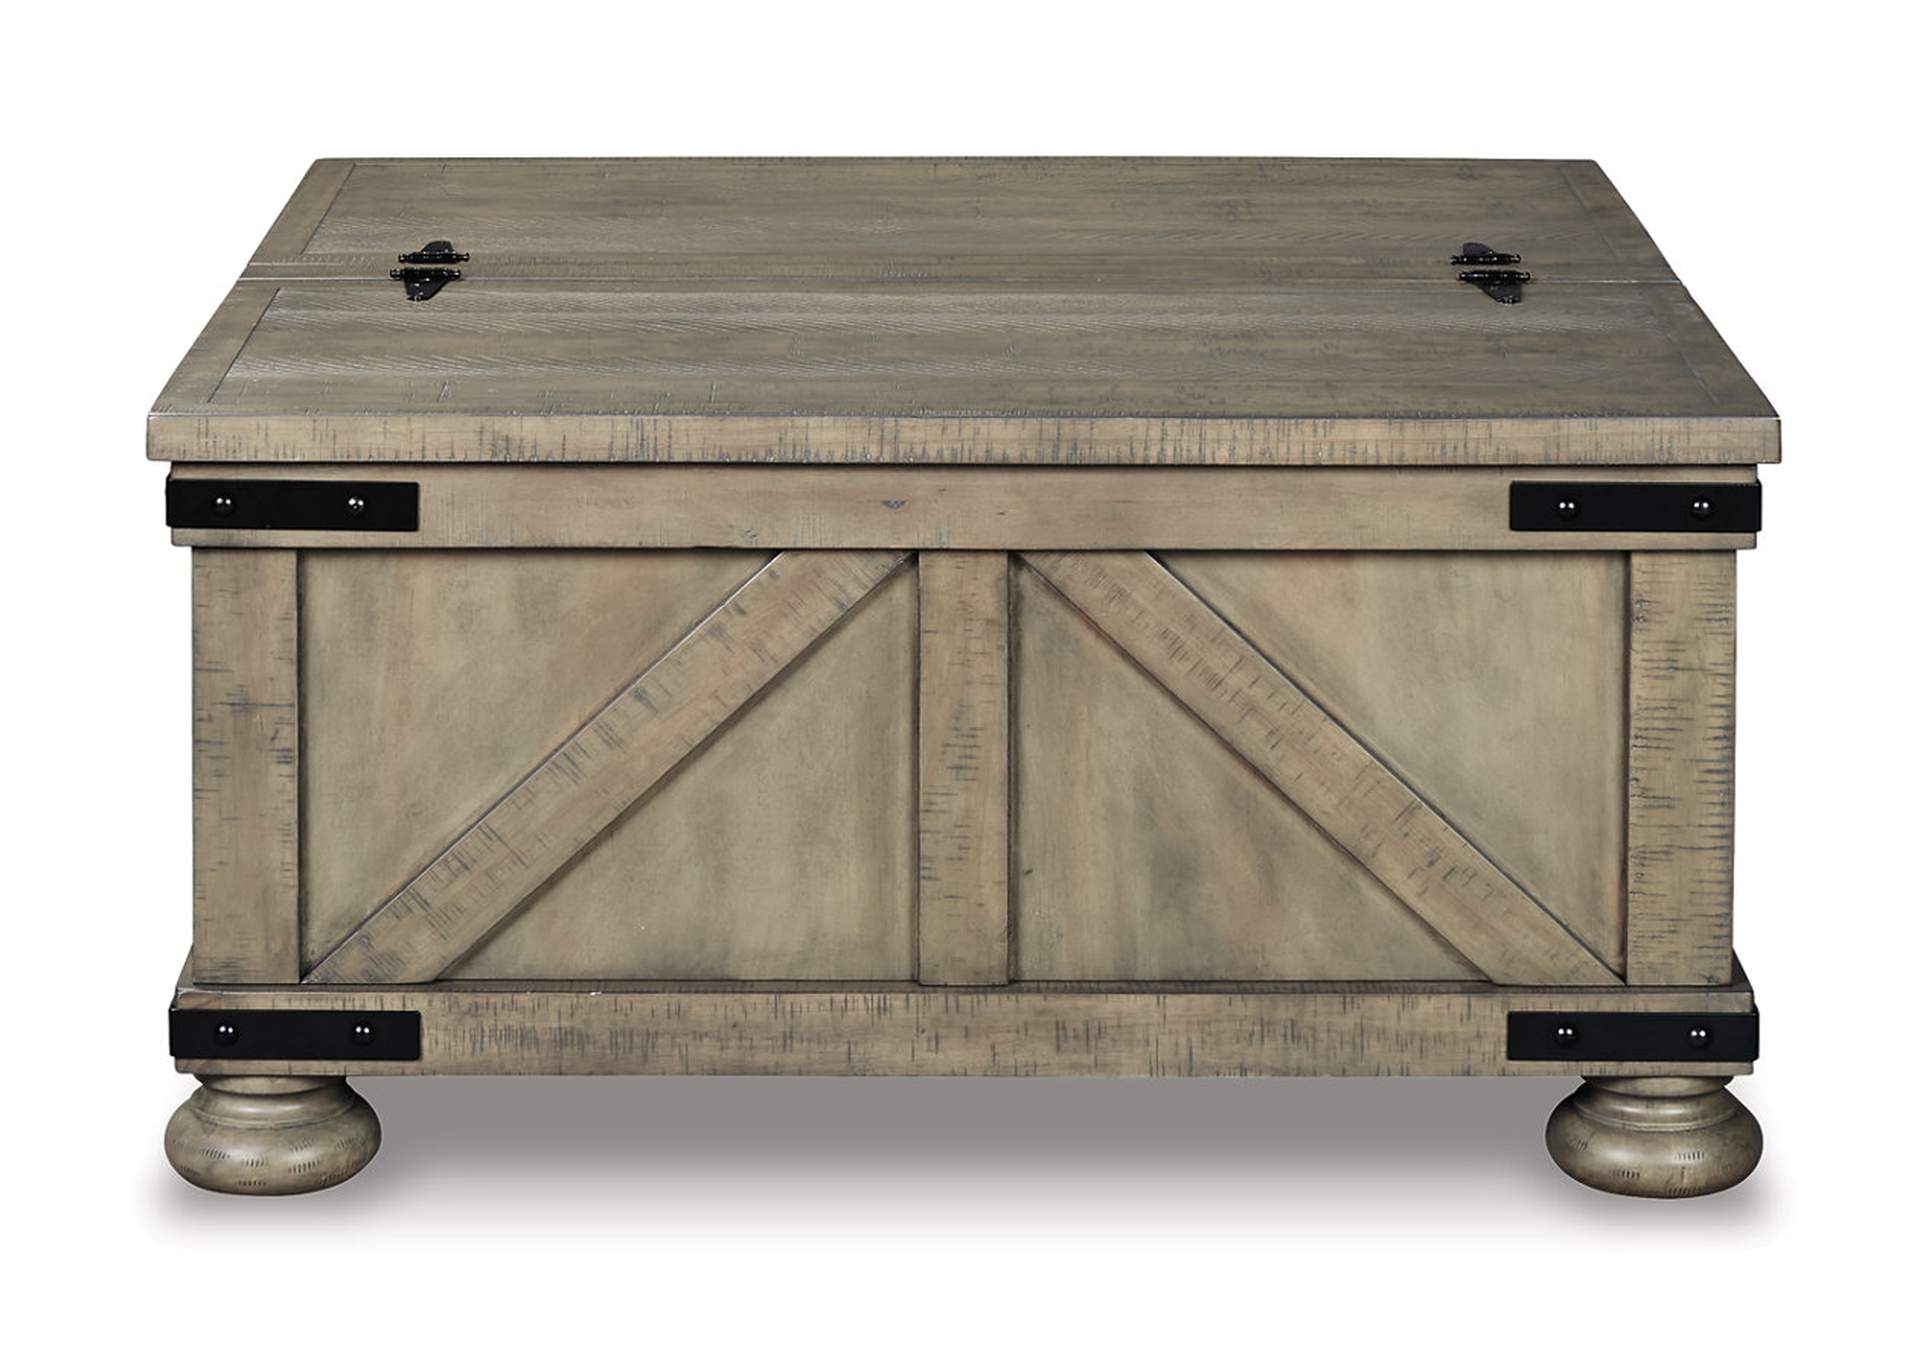 Aldwin Coffee Table With Storage,Signature Design By Ashley